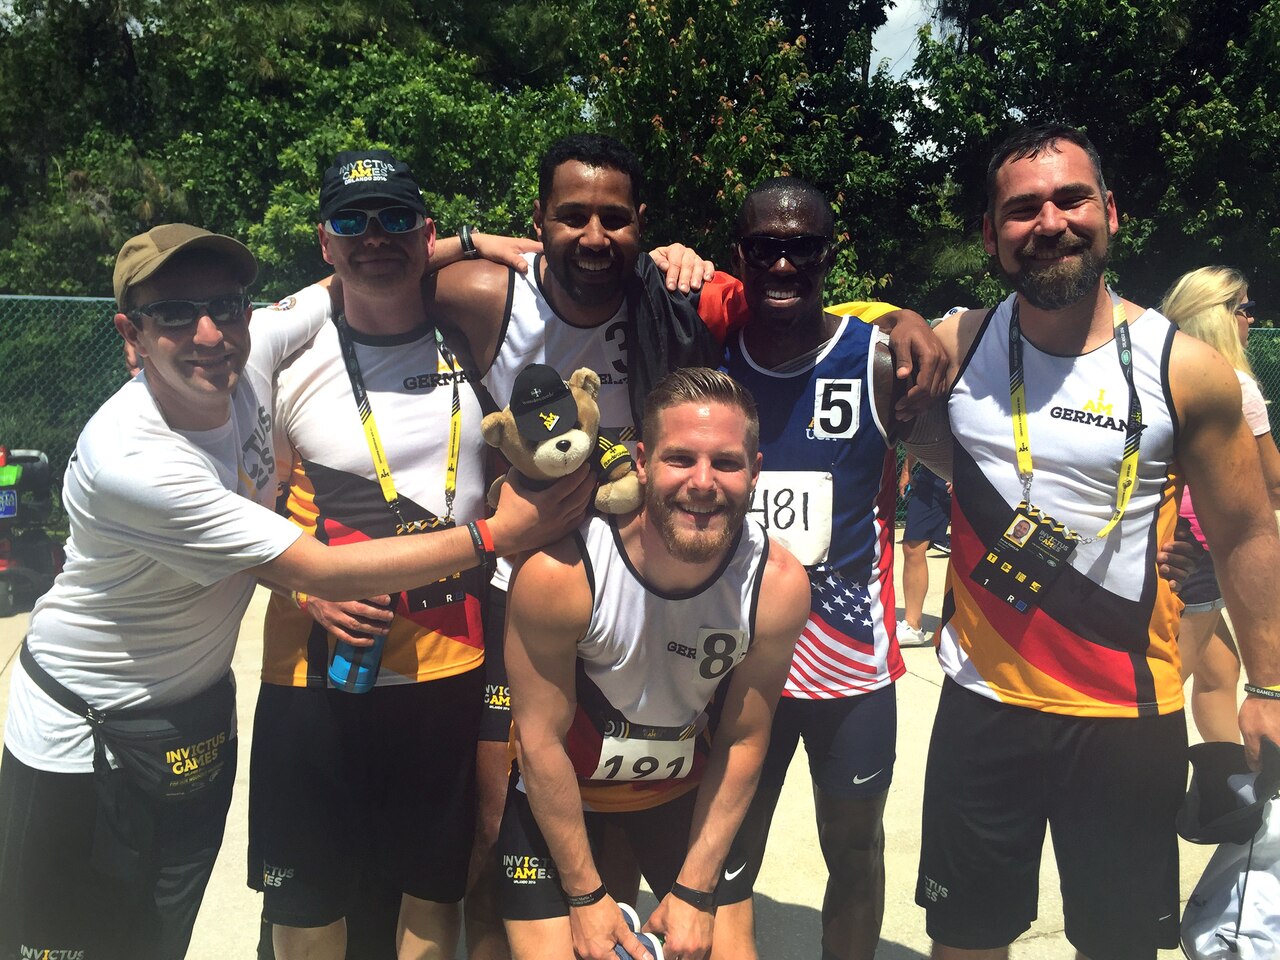 Army Reservist Staff Sgt. Zed Pitts stops for a photo with his German friend, fellow runner, 1st Sgt. Naef Adebahr and his friends after Adebahr received his bronze in the men's 200-meter dash and Pitts received his silver in the men's 100-meter dash in their respective disability categories during the track and field competition at the Invictus Games at the ESPN Wide World of Sports, Walt Disney World, Orlando, Fla., May 10, 2016. (DoD photo by Shannon Collins)